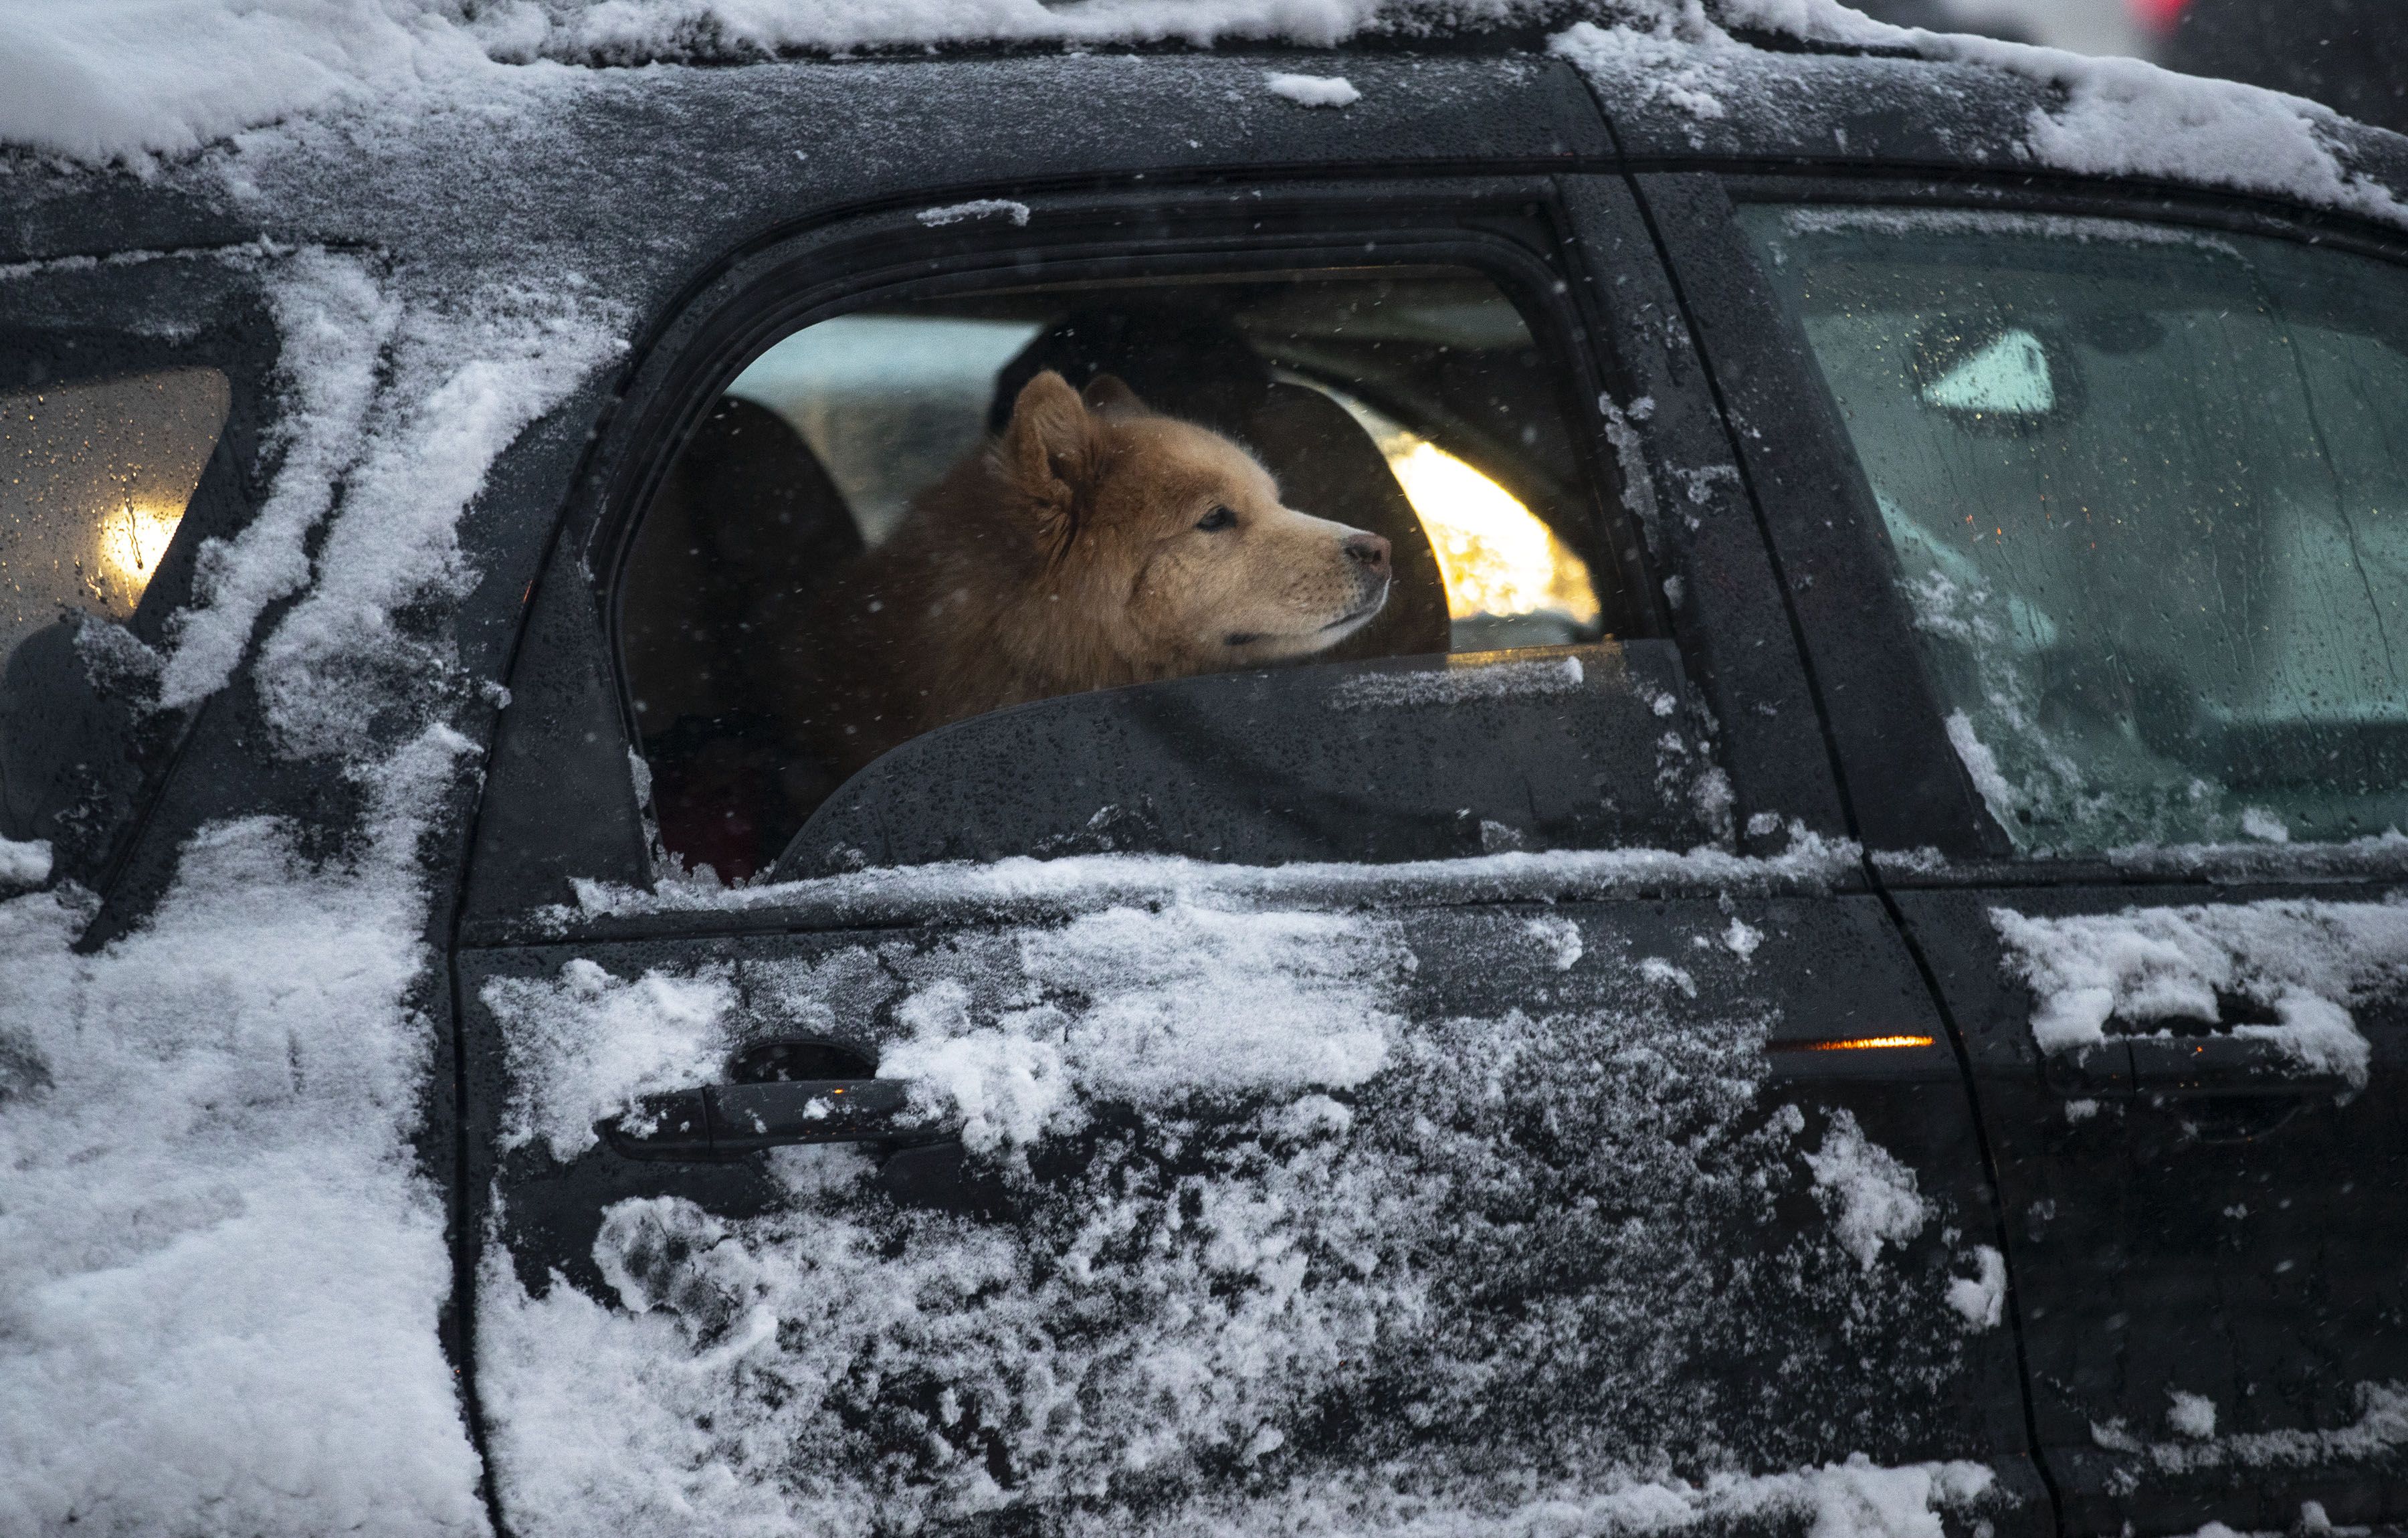 A dog poked their head through an open window as snow fell on Wednesday morning on Superior St. in Duluth, MN. 